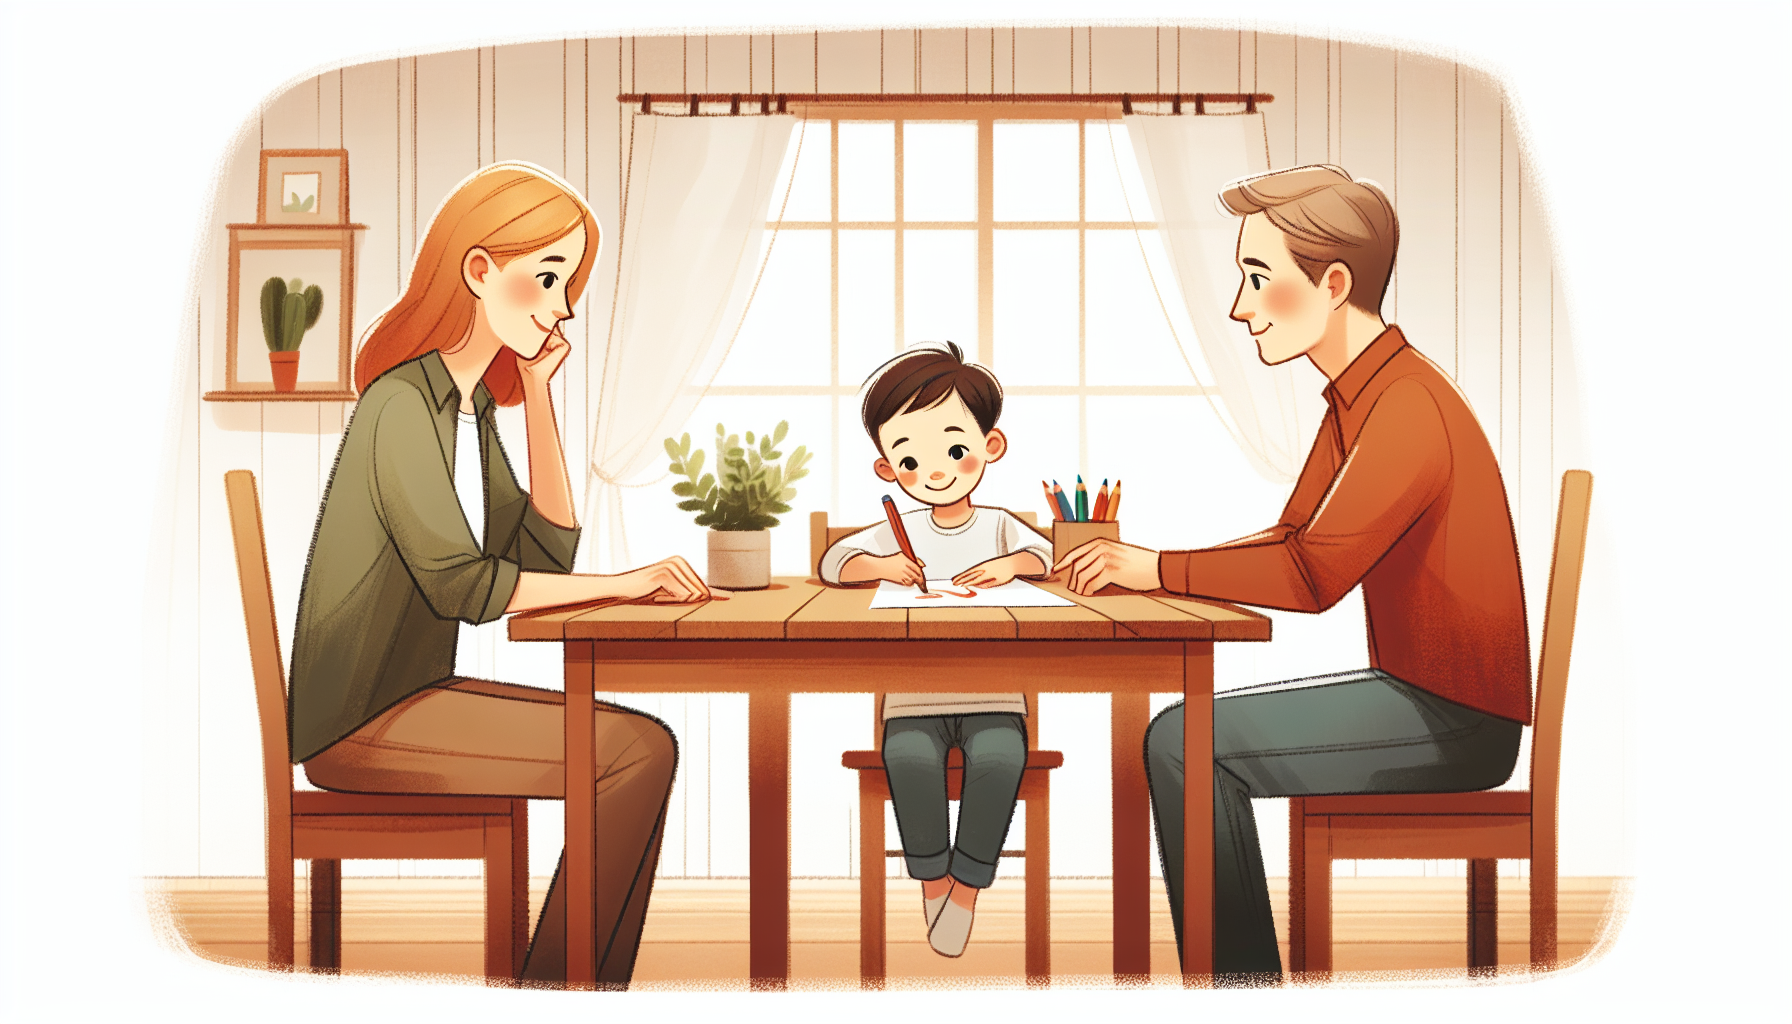 Illustration of two parents maintaining a civil relationship for the child's well-being